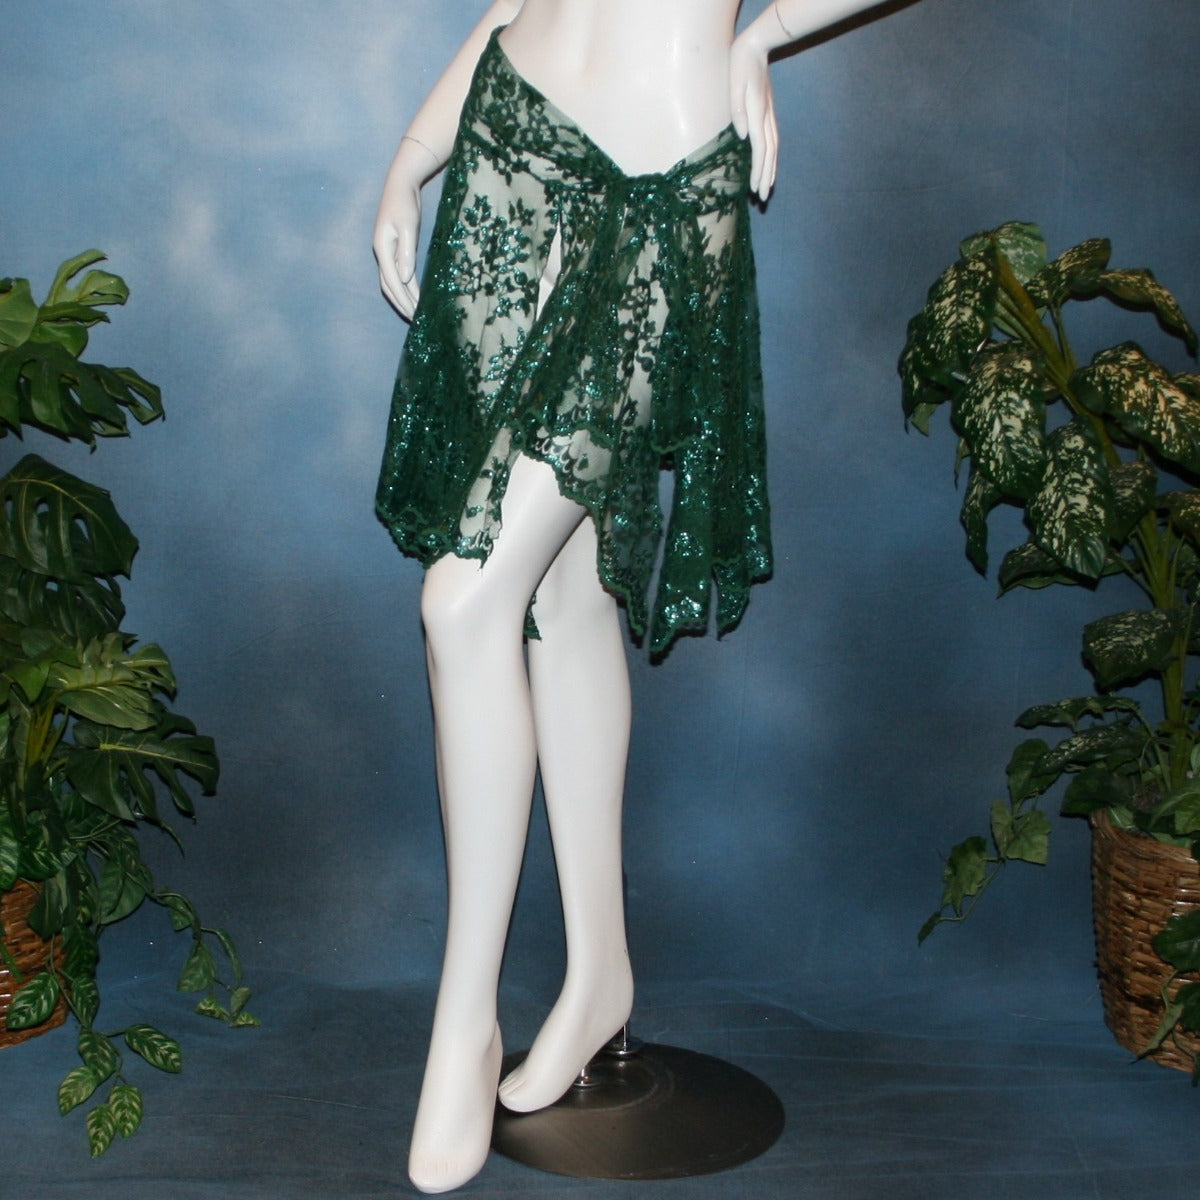 Crystal's Creations Green lace short Latin/rhythm skirt, wrap style, was created with green metallic lace.